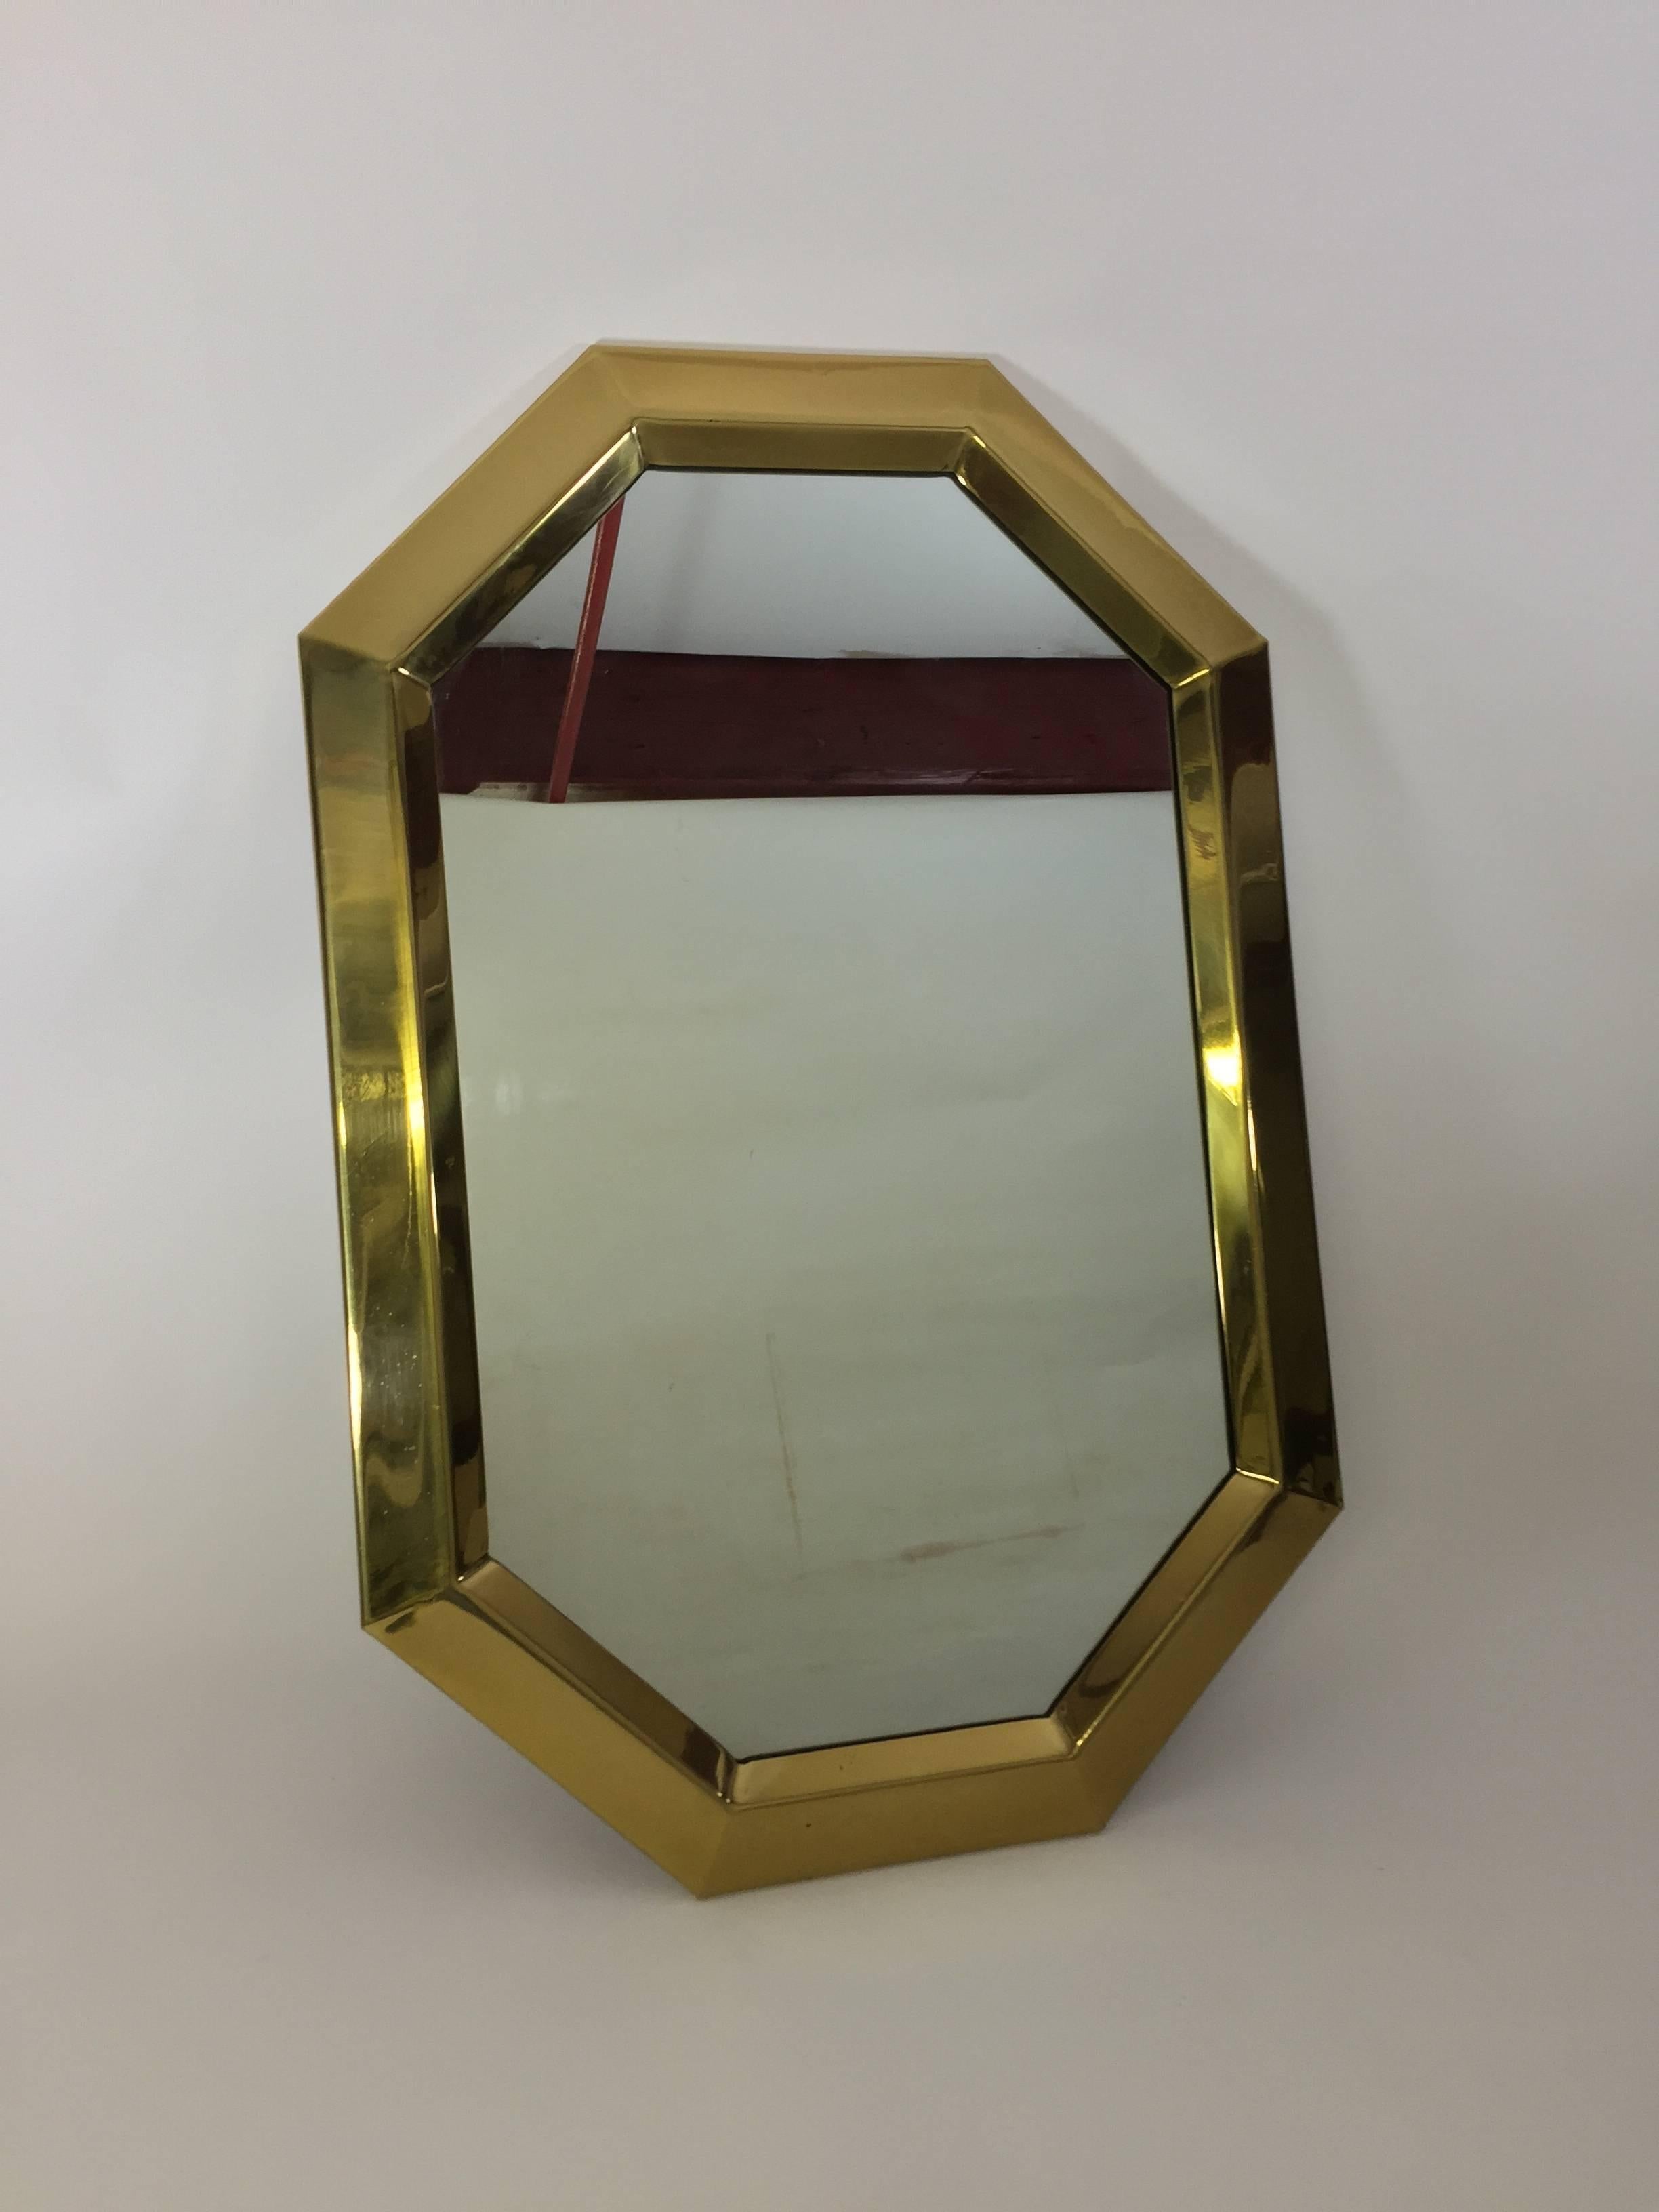 Beveled brass 1970s mirror. Very good condition. Can be hung vertically or horizontally.